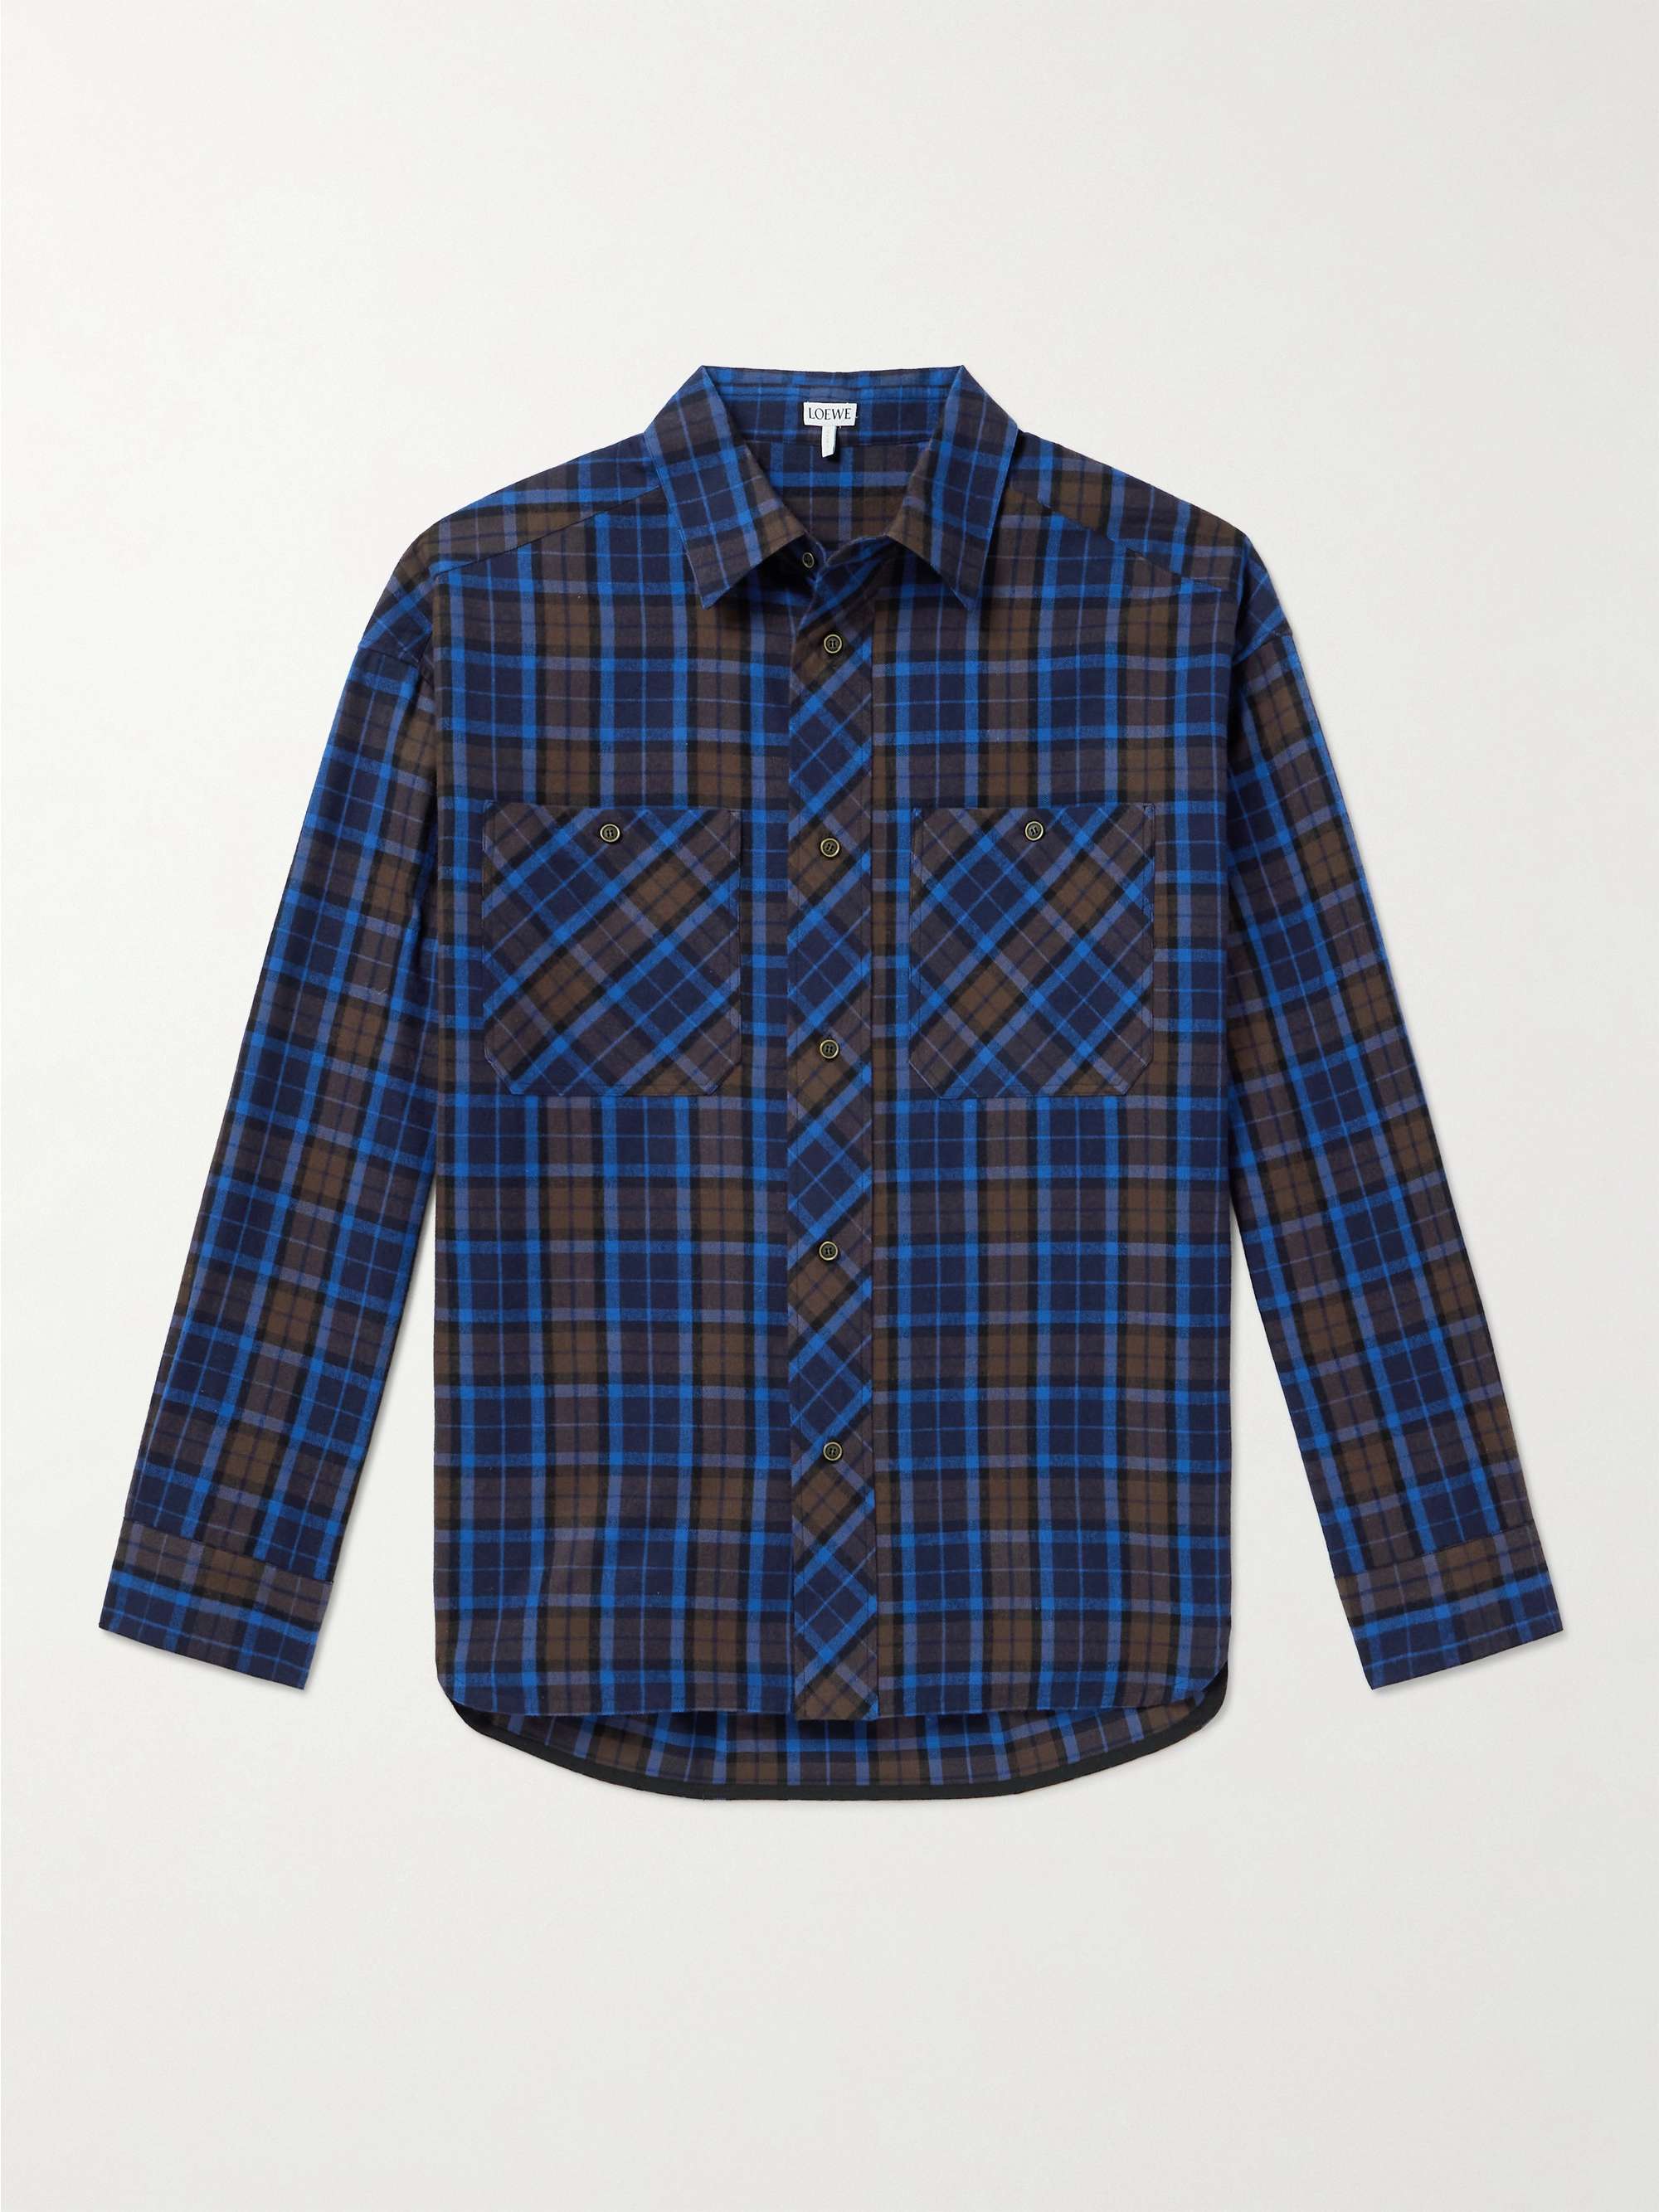 LOEWE Leather-Trimmed Checked Cotton-Flannel Shirt for Men | MR PORTER